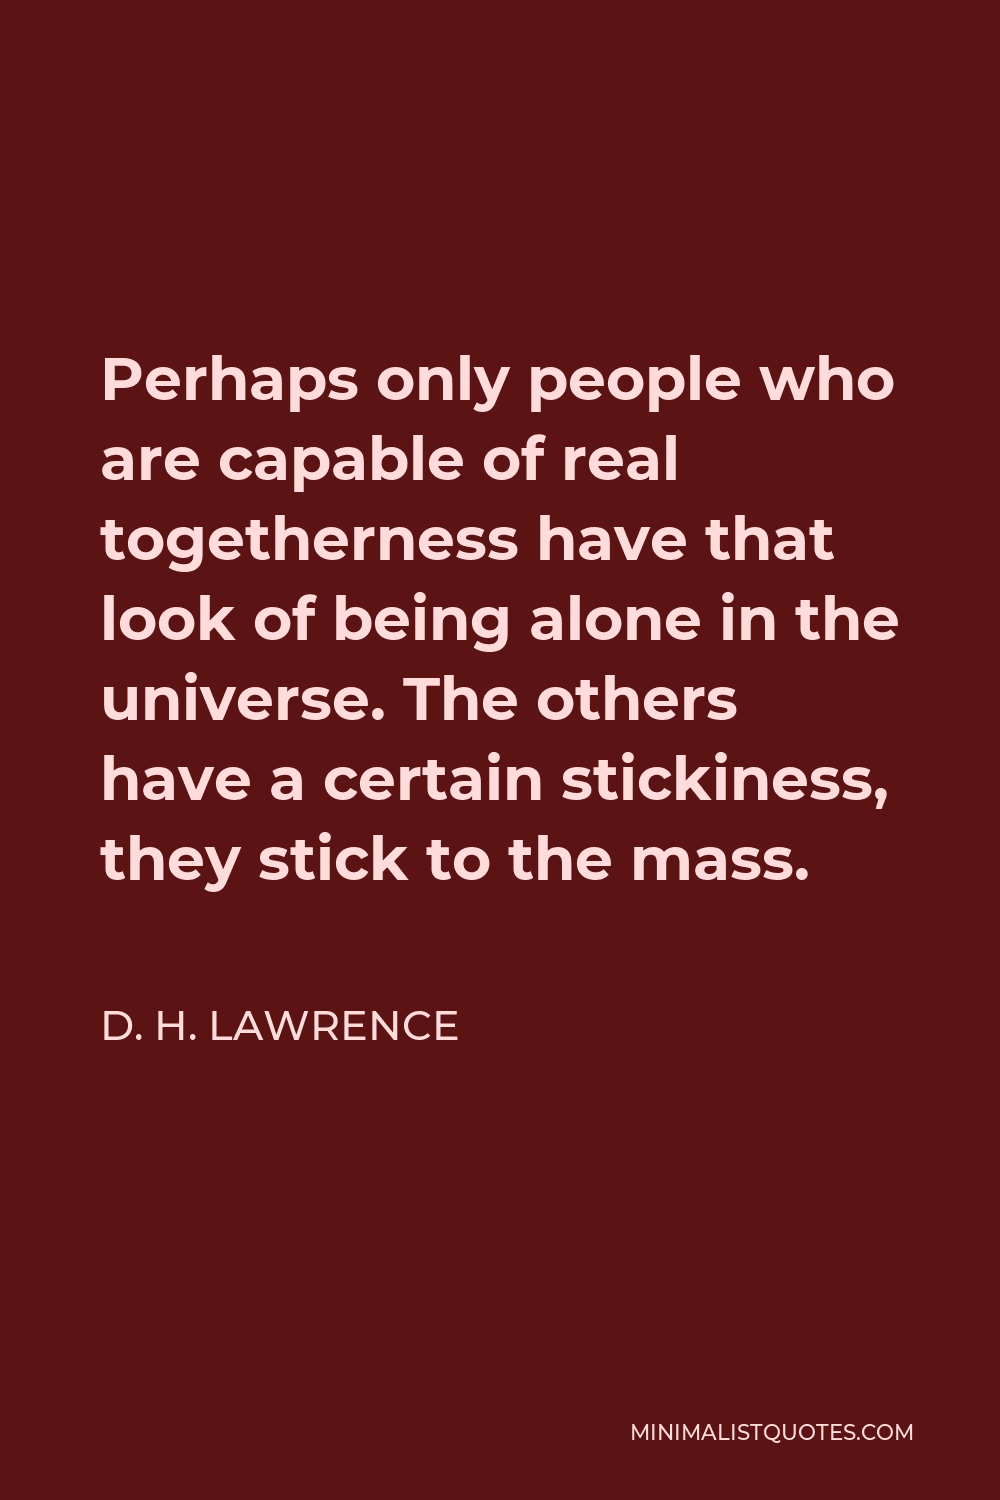 D. H. Lawrence Quote - Perhaps only people who are capable of real togetherness have that look of being alone in the universe. The others have a certain stickiness, they stick to the mass.